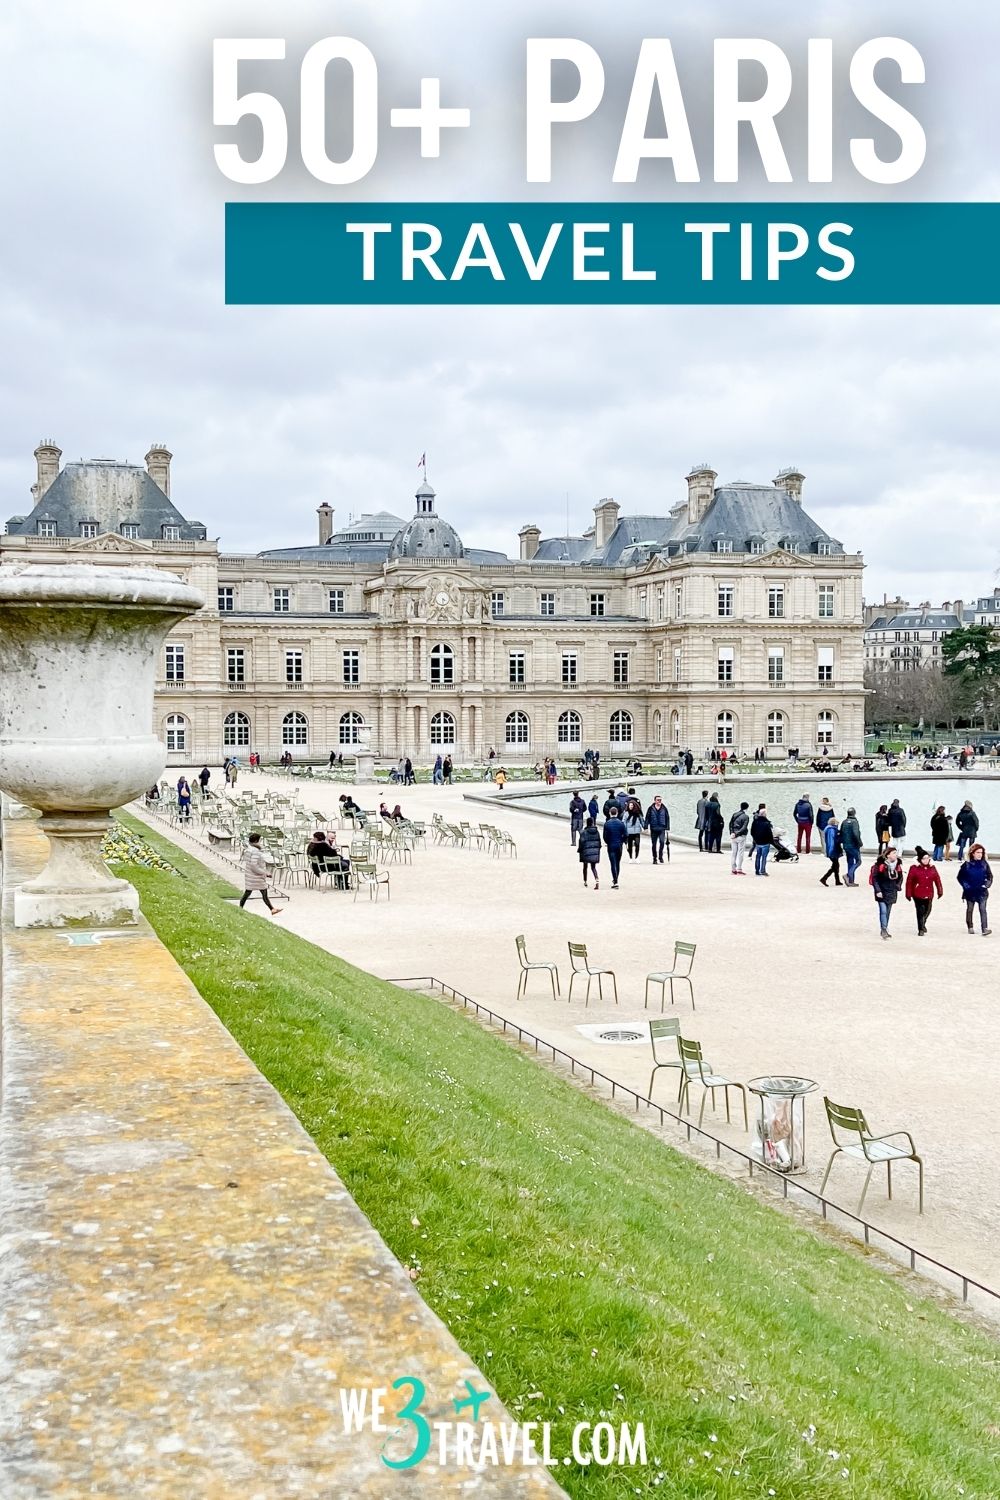 50+ Paris travel tips for first time visitors planning a Paris vacation